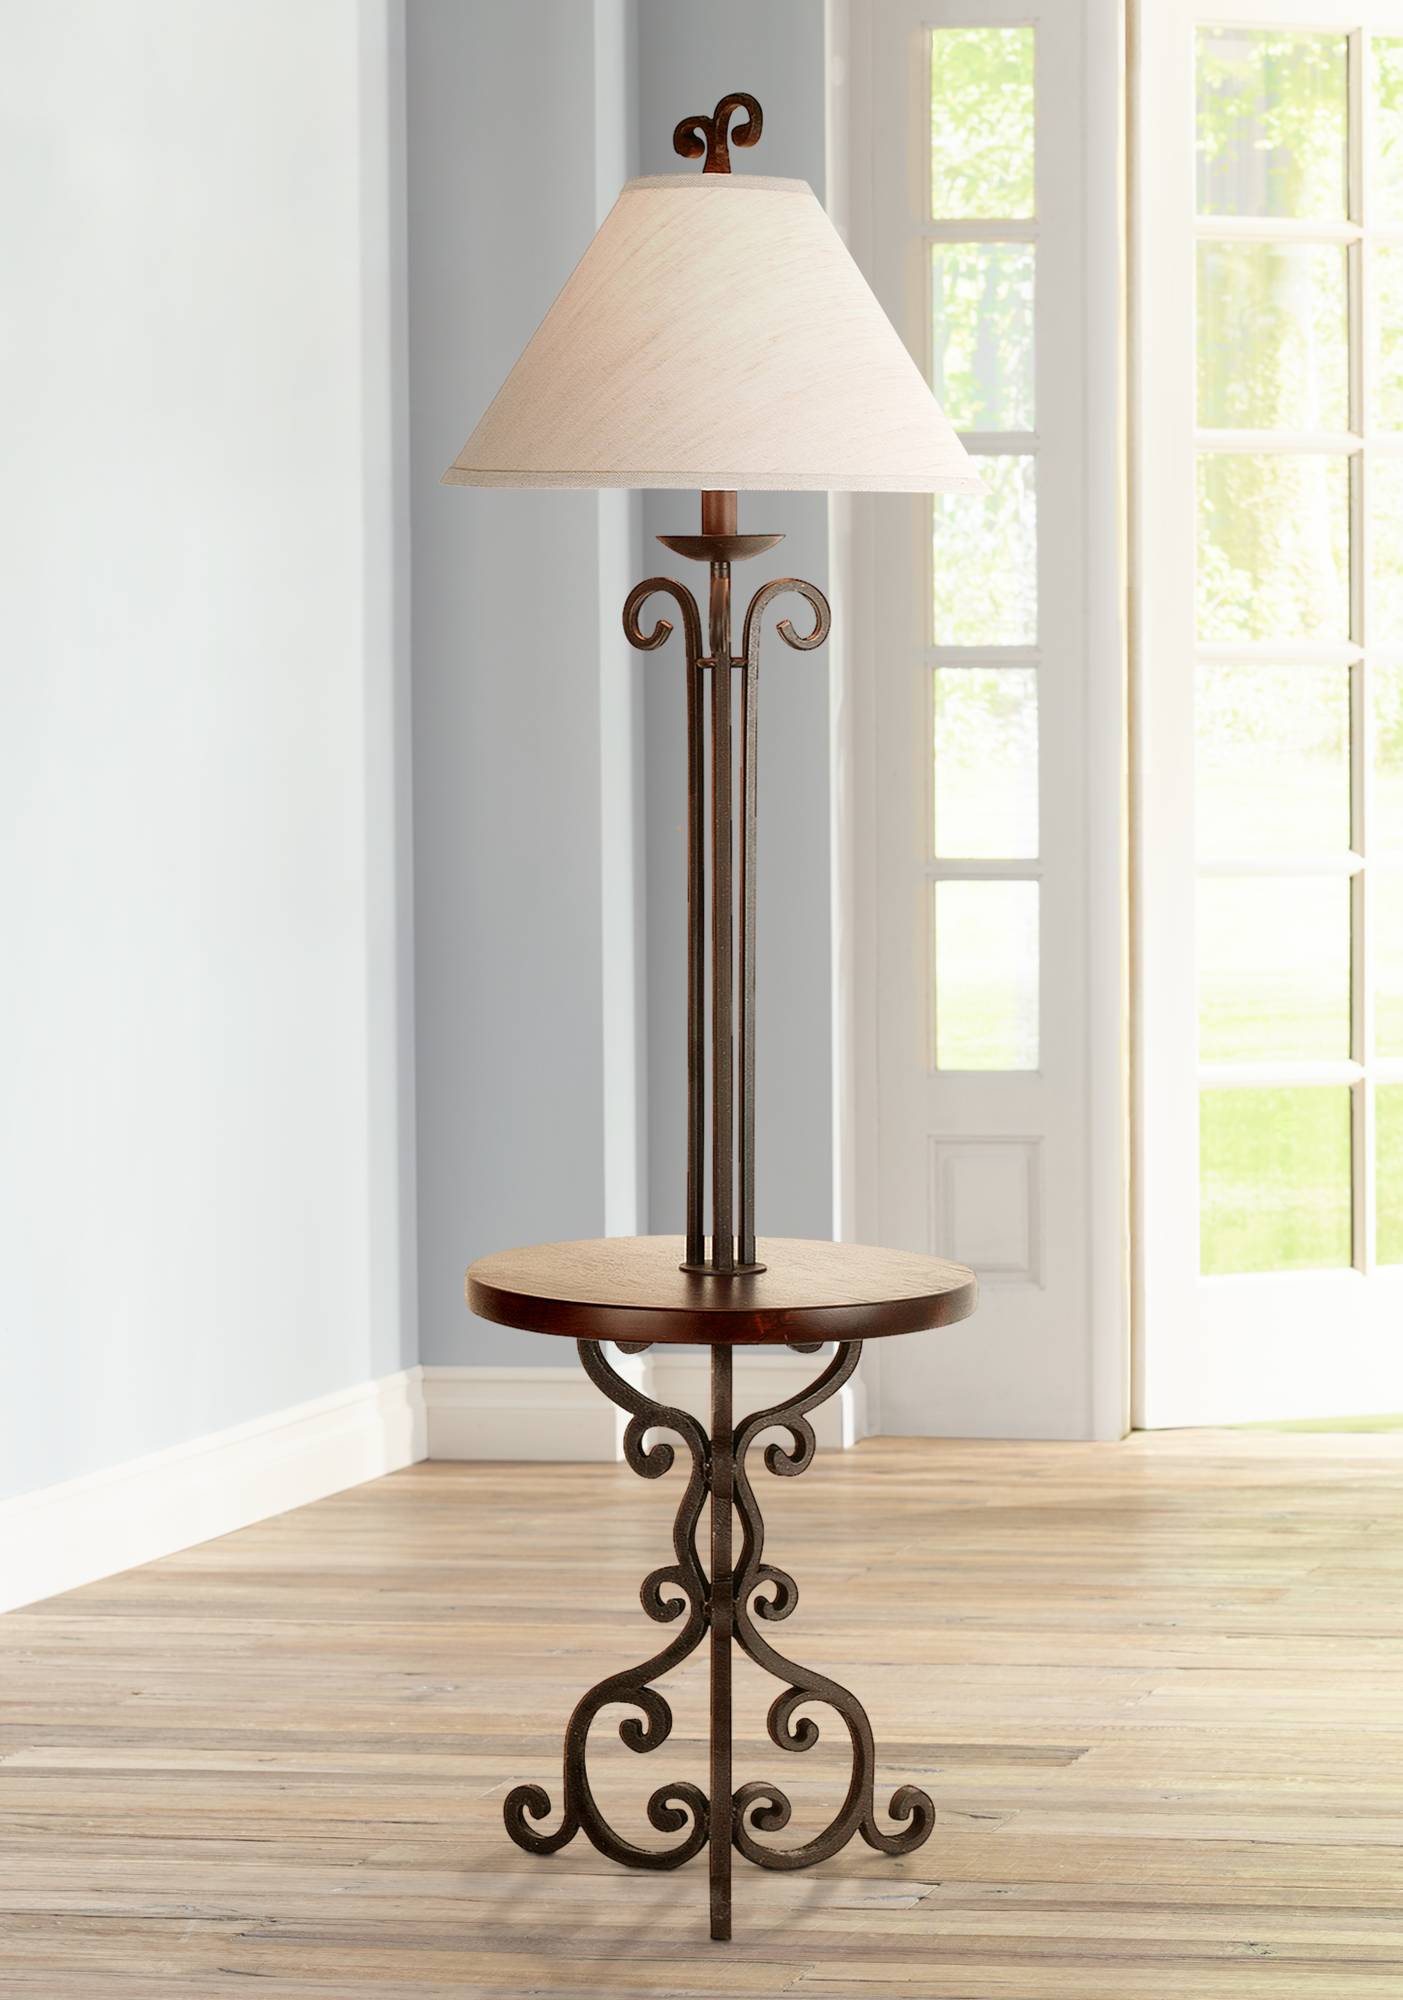 Traditional Floor Lamp with Table Iron Rust Wooden for Living Room